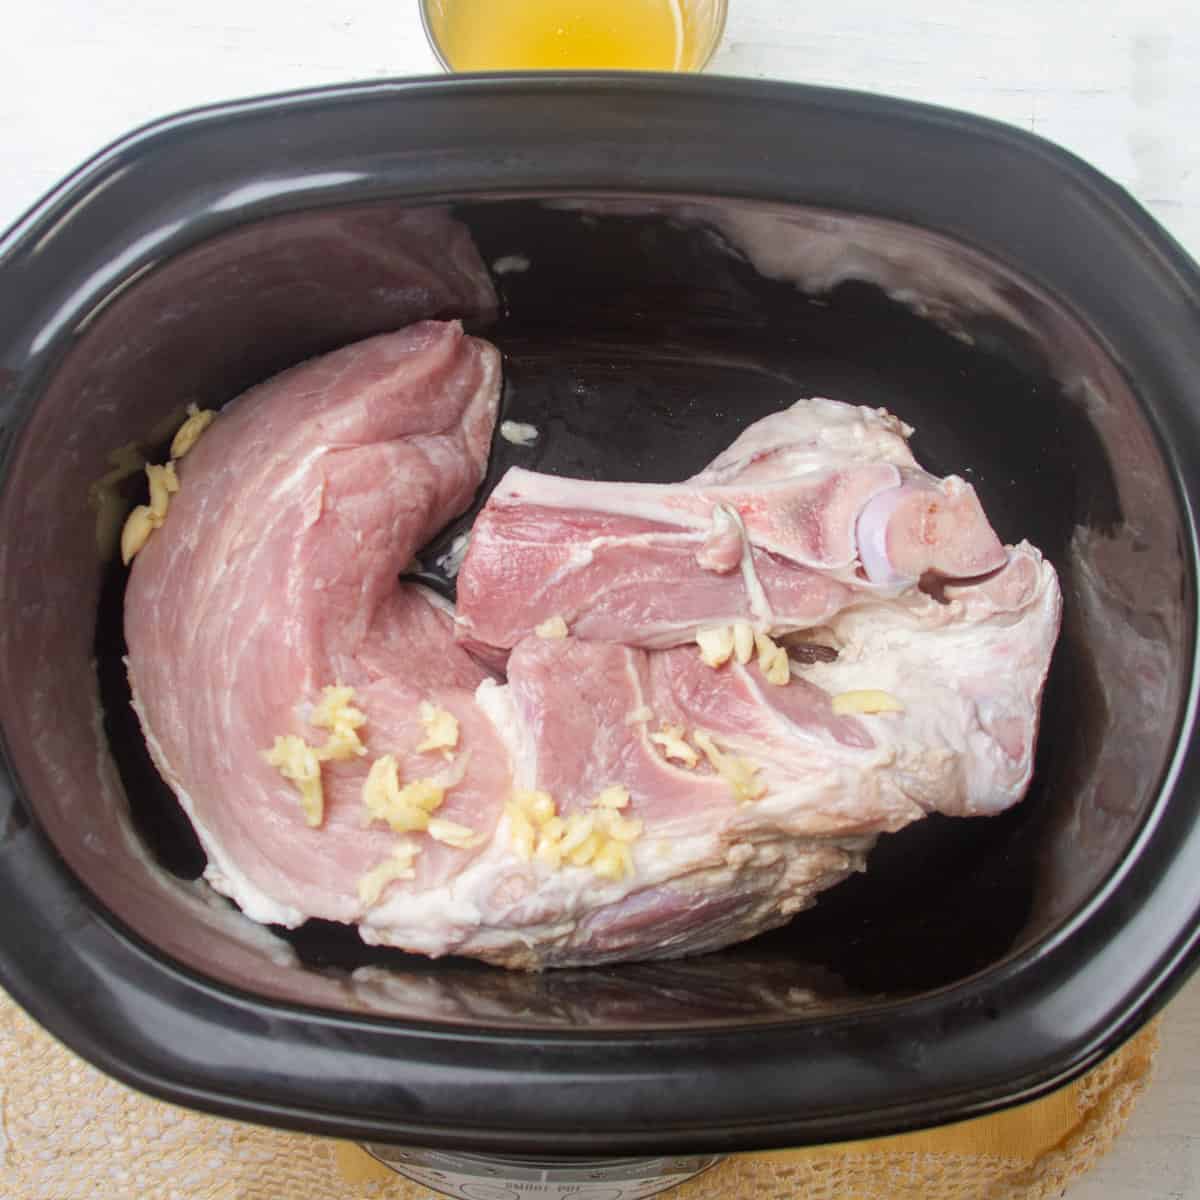 Add prepped pork shoulder and garlic to the slow cooker.